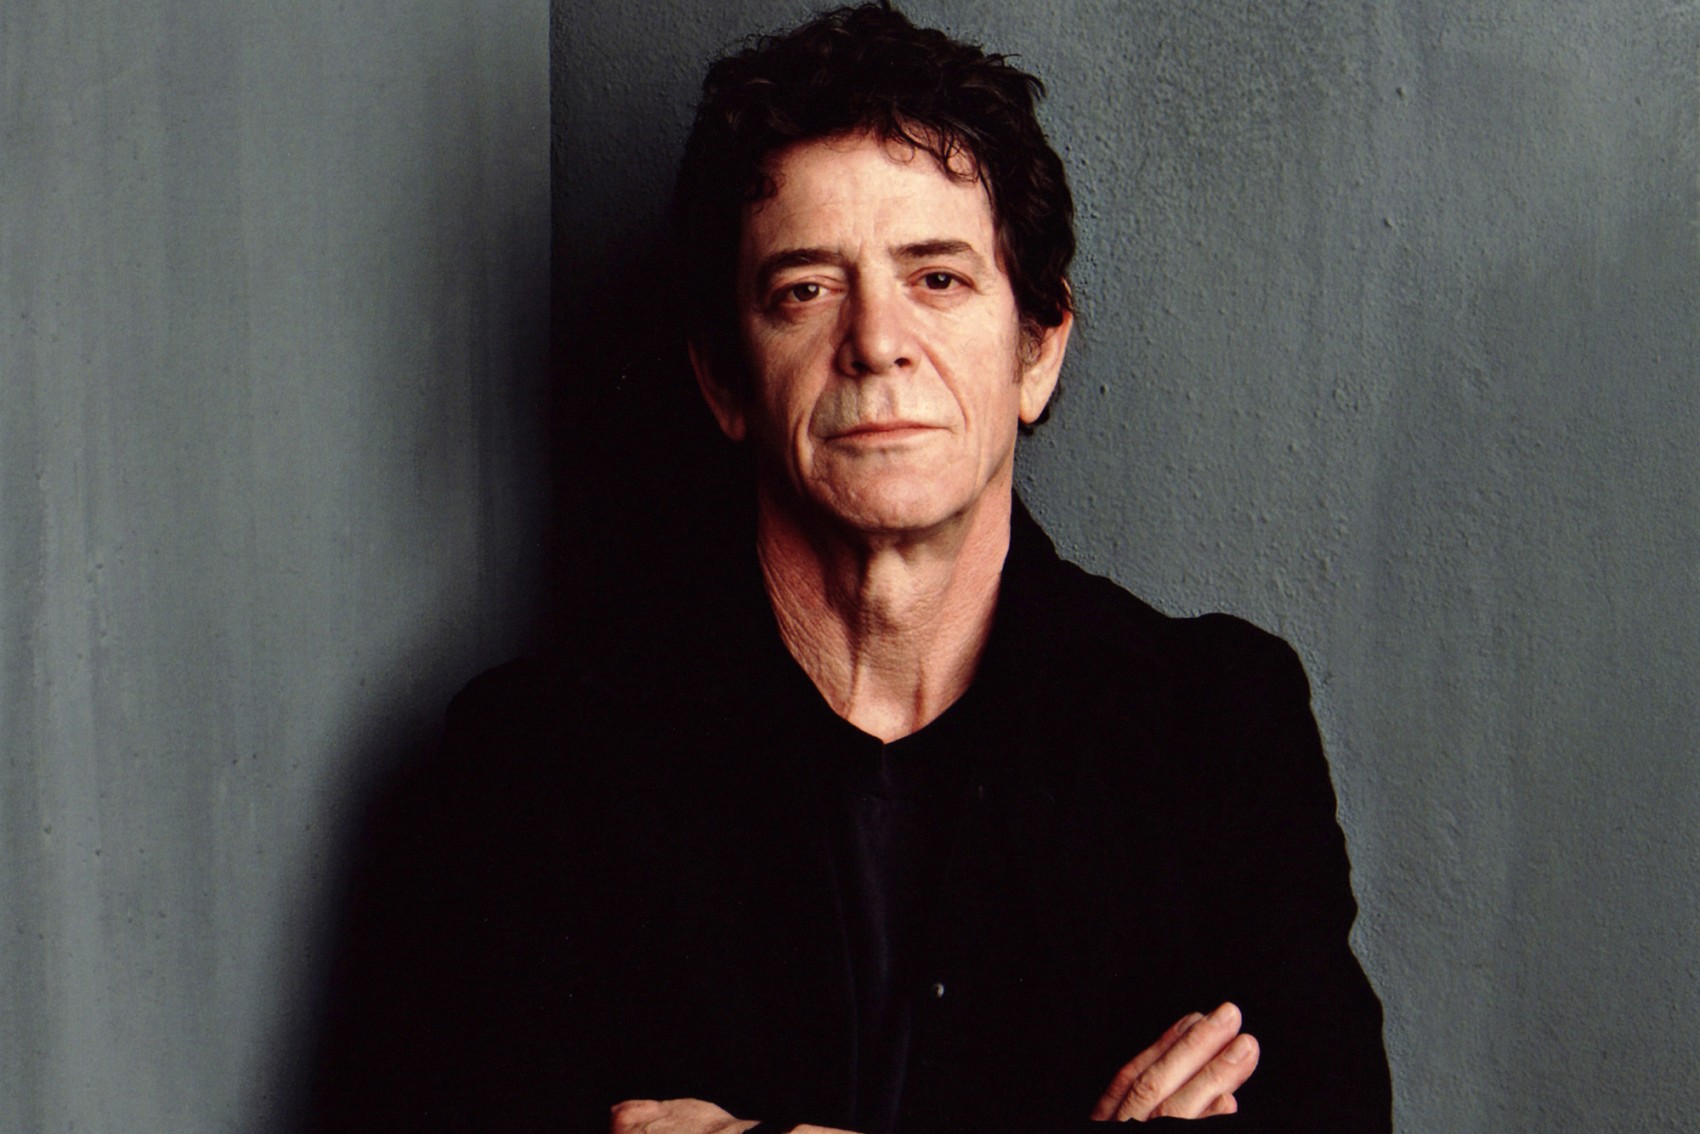 LOU REED (March 2, 1942 - October 27, 2013) was an American rock musician and songwriter. He was guitarist, vocalist, and principal songwriter of the Velvet Underground, a late 1960s group that gained a considerable cult following in the years since its demise, and has gone on to become one of the most widely cited and influential bands of the era. PICTURED: Oct 28, 2013 - London, England, United Kingdom - LOU REED in 2003. (exact date unknown) (Credit Image: © Timothy Greenfield-Sanders/UPPA/ZUMAPRESS.com)